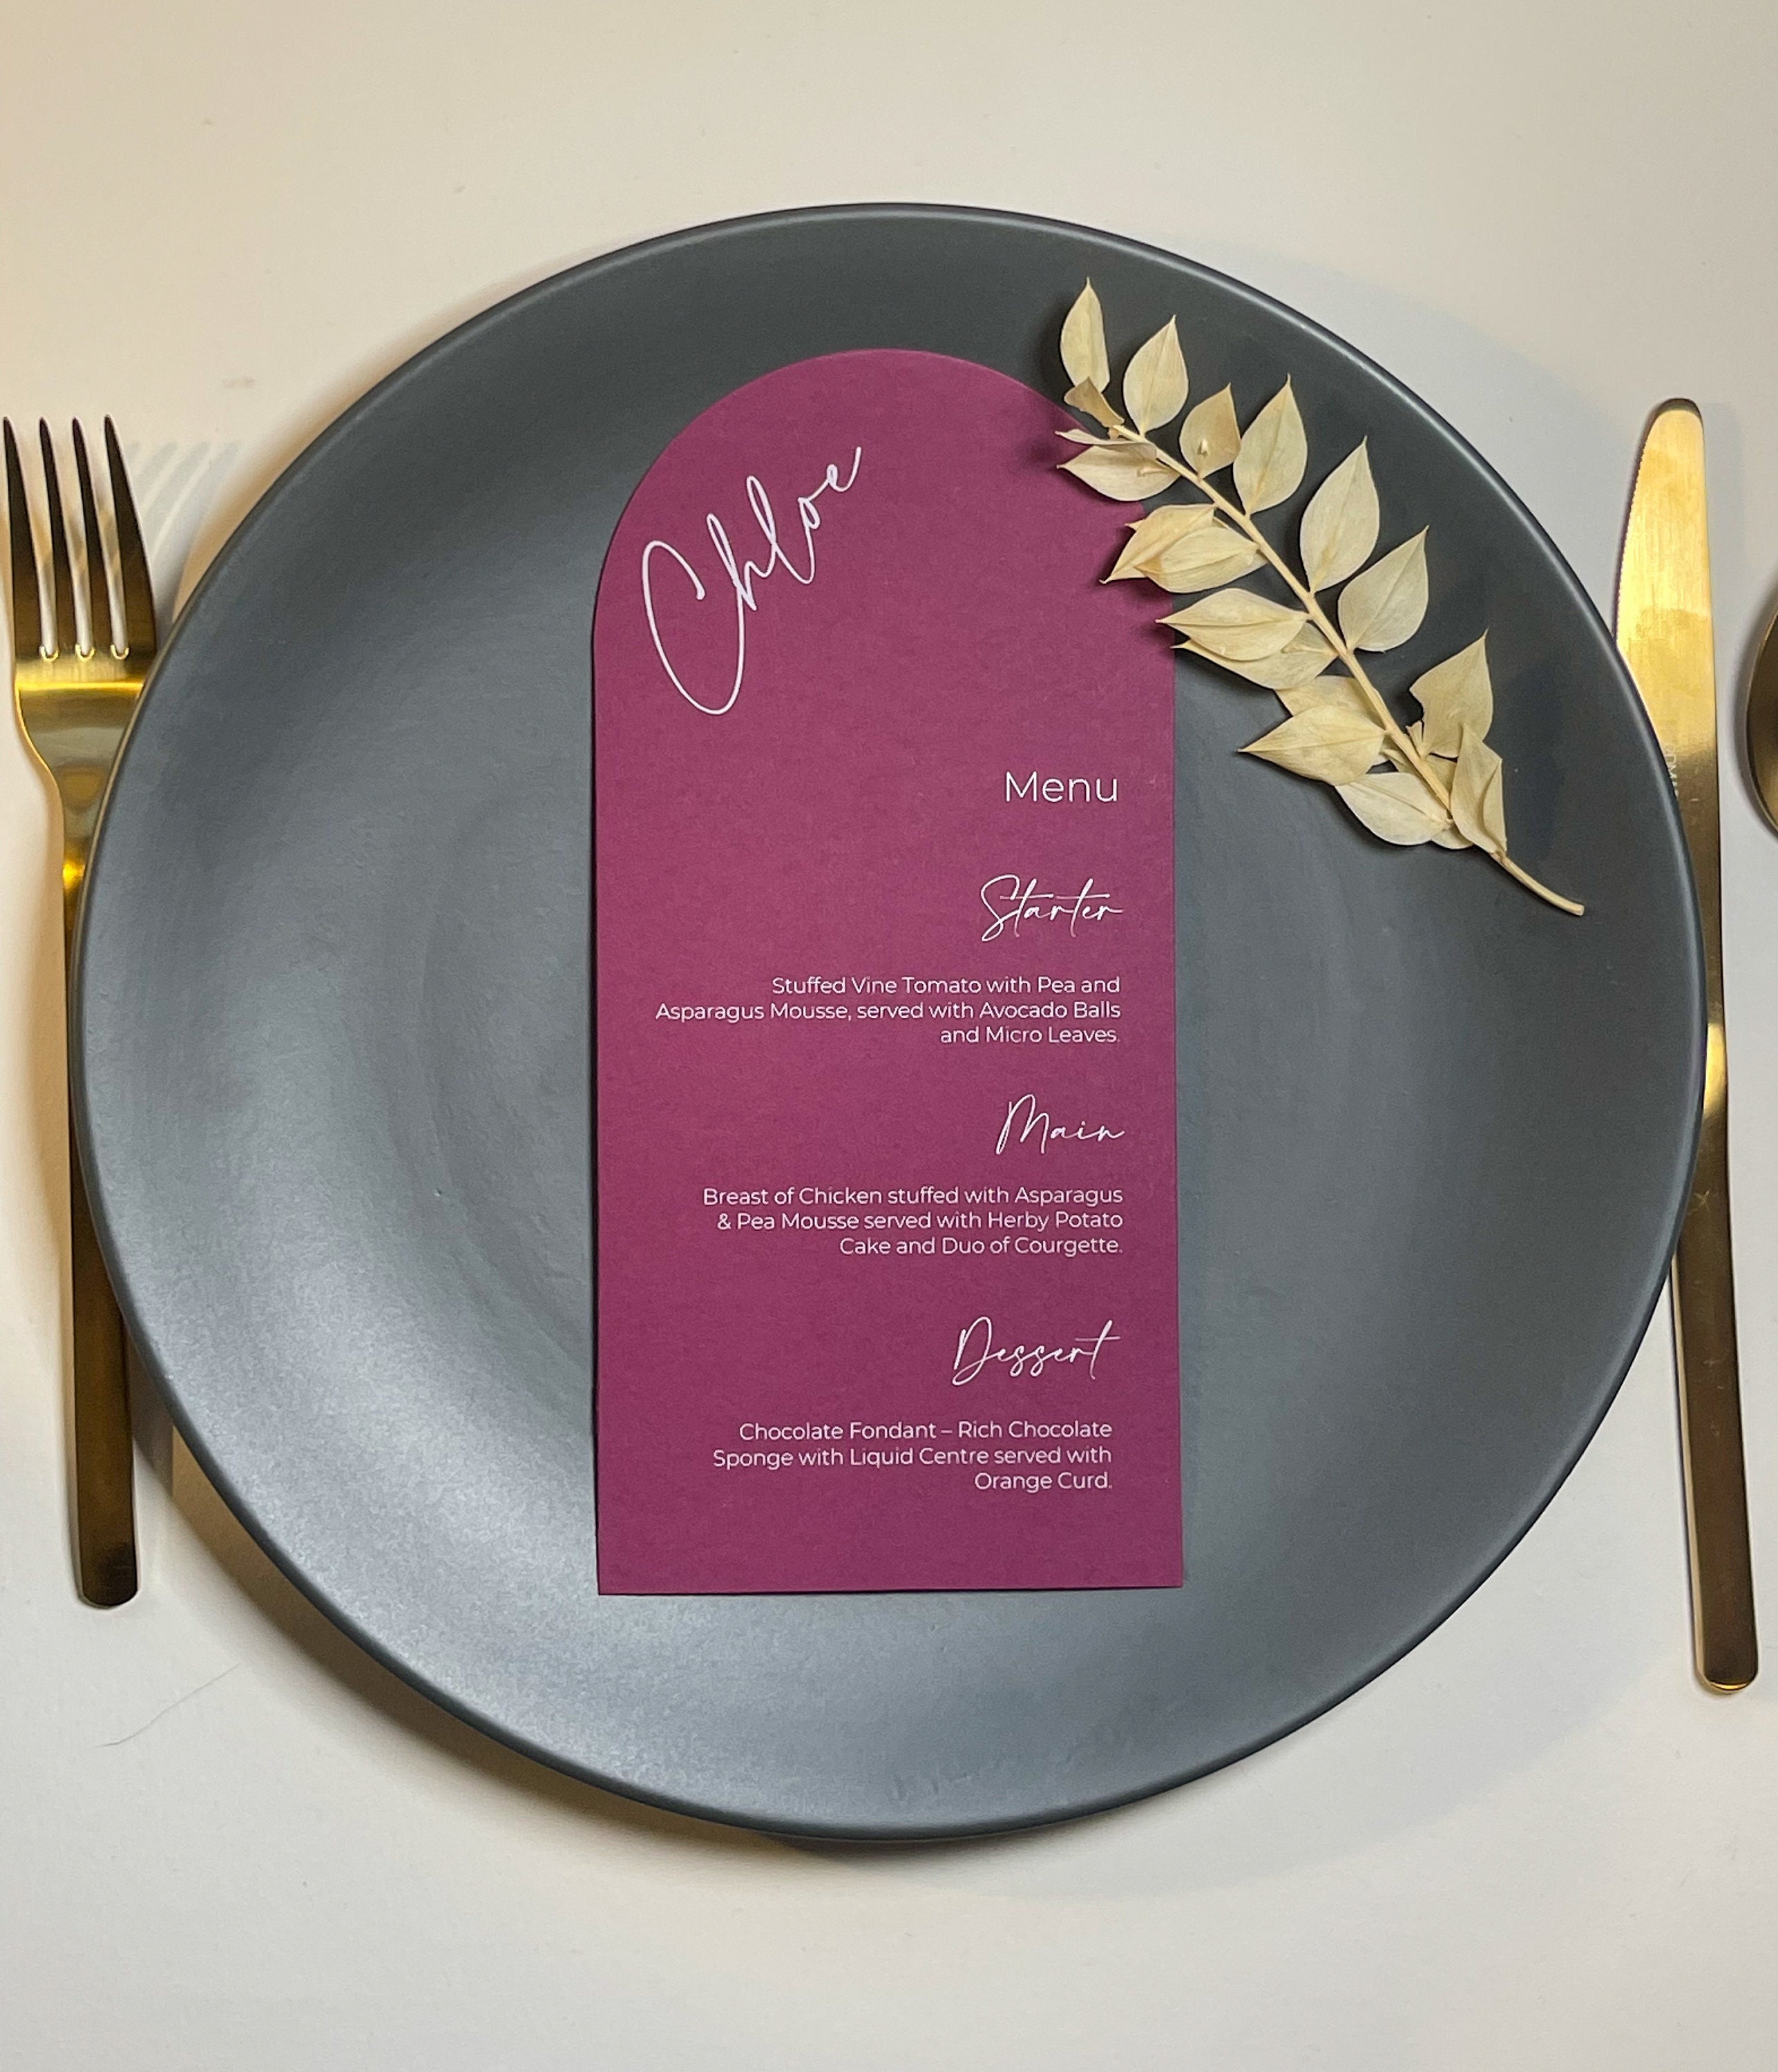 Menu, Placecards, Place Names, Wedding, Arch, Cards, Name, Event, Dinner, Meal